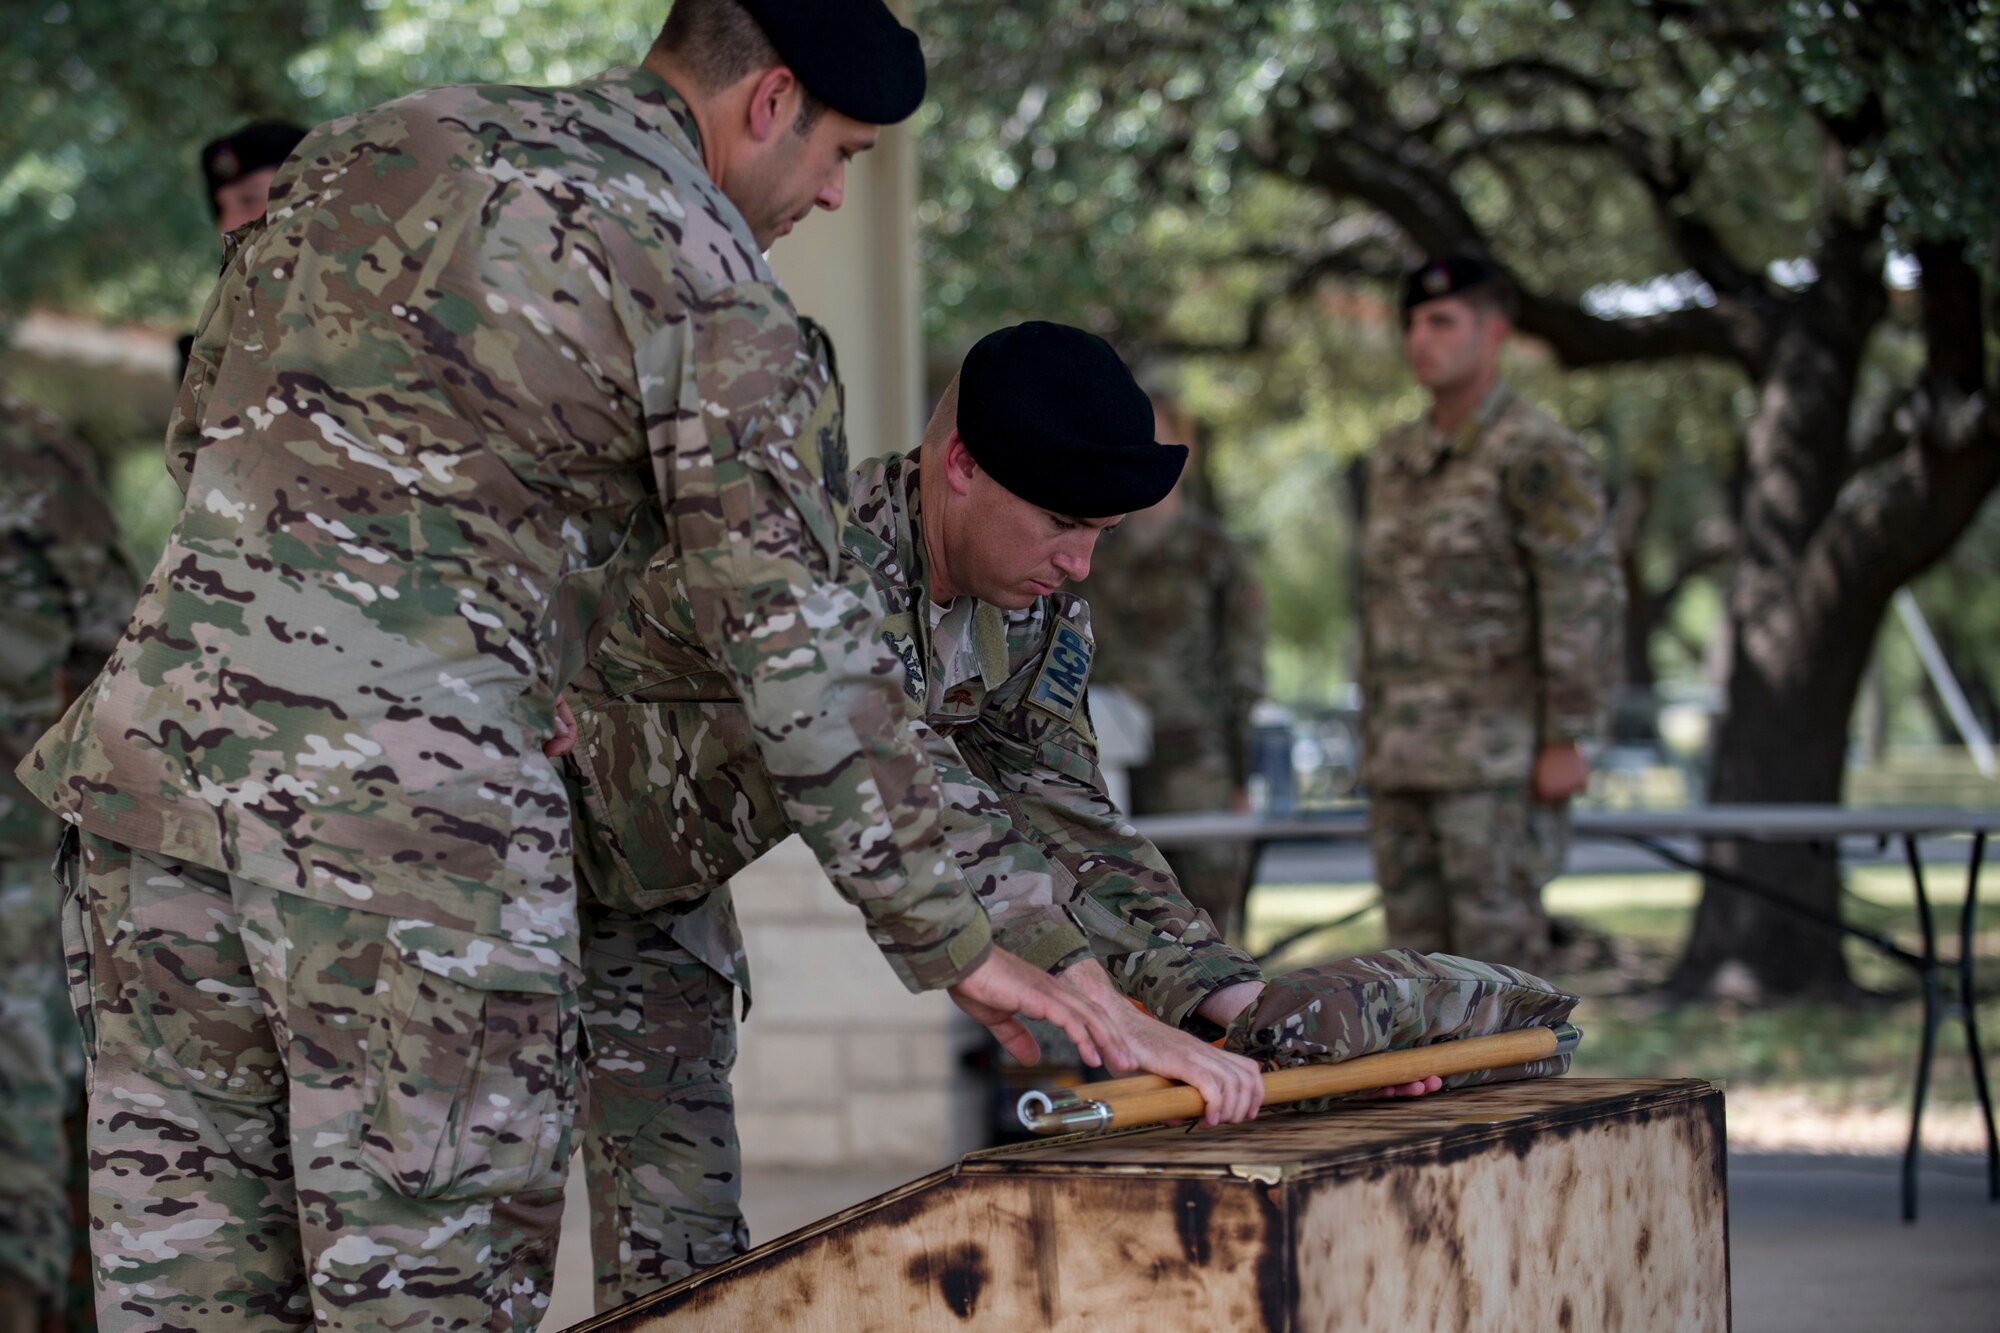 Lt. Col. Frank Biancardi, outgoing 11th Air Support Operations Squadron (ASOS) commander, and Master Sgt. Daniel Nestor, 11th ASOS superintendent, place an unassembled guidon to rest during a squadron inactivation ceremony, June 21, 2018, at Fort Hood, Texas. As a part of the 93d Air Ground Operations Wing from Moody Air Force Base, Ga., the 11th ASOS ‘Steel Eagles’ mission will remain unchanged as they continue to support Ft. Hood and absorb into the 9th ASOS. The enhanced 9th ASOS will continue to provide tactical air support to align with any U.S. Army unit that needs air support for their scheme of maneuver. (U.S. Air Force photo by Senior Airman Daniel Snider)